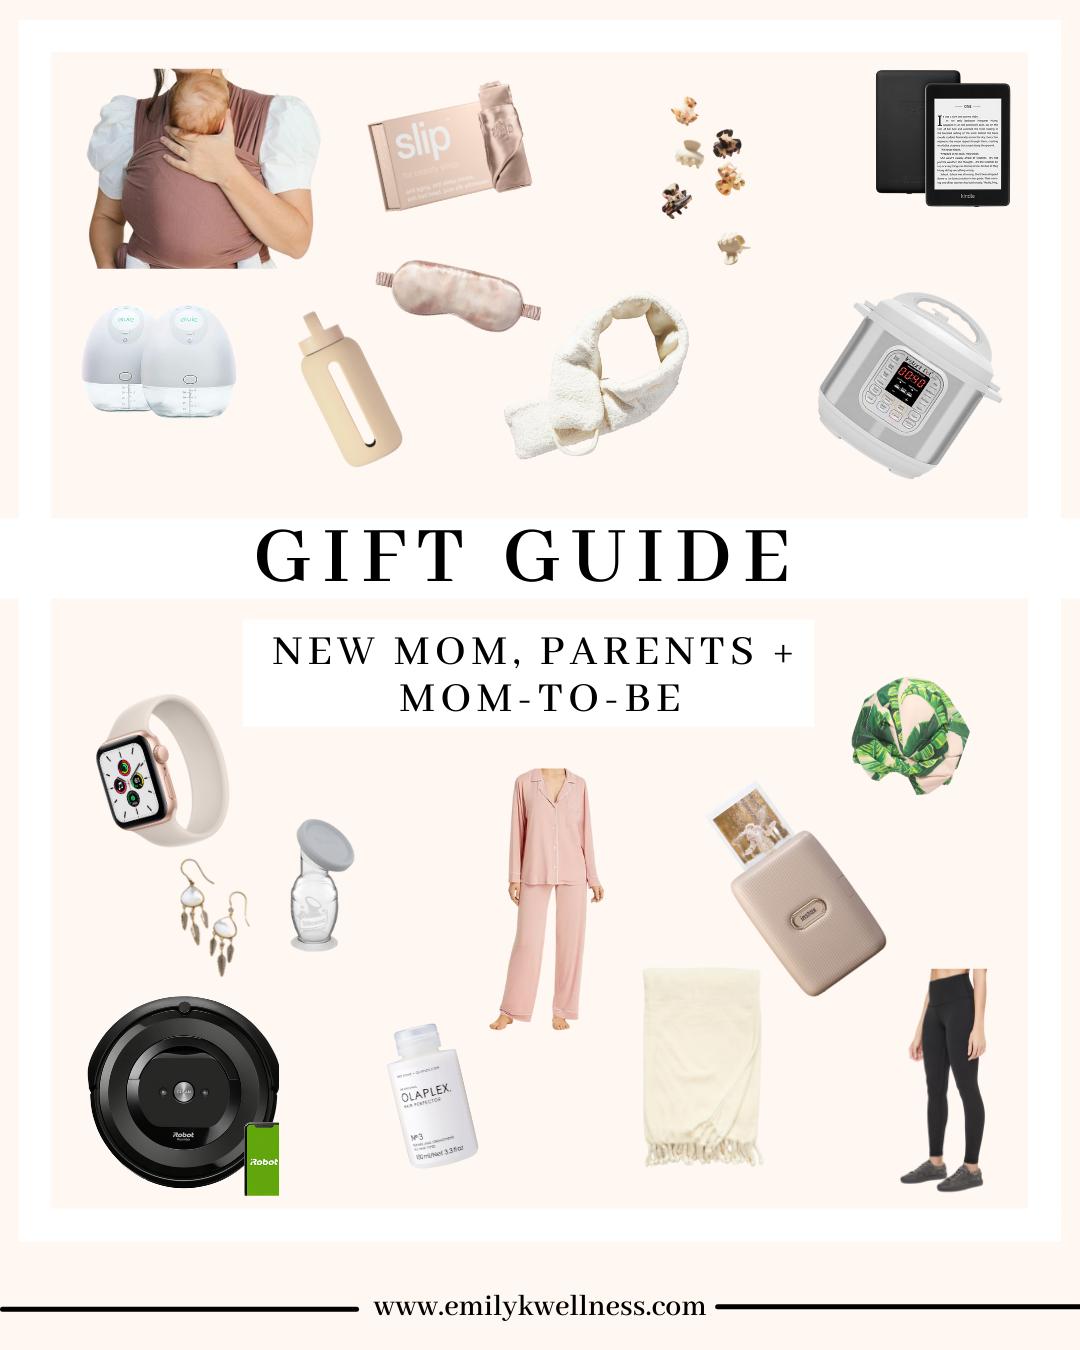 GIFT GUIDE FOR NEW MOMS - Katie Did What